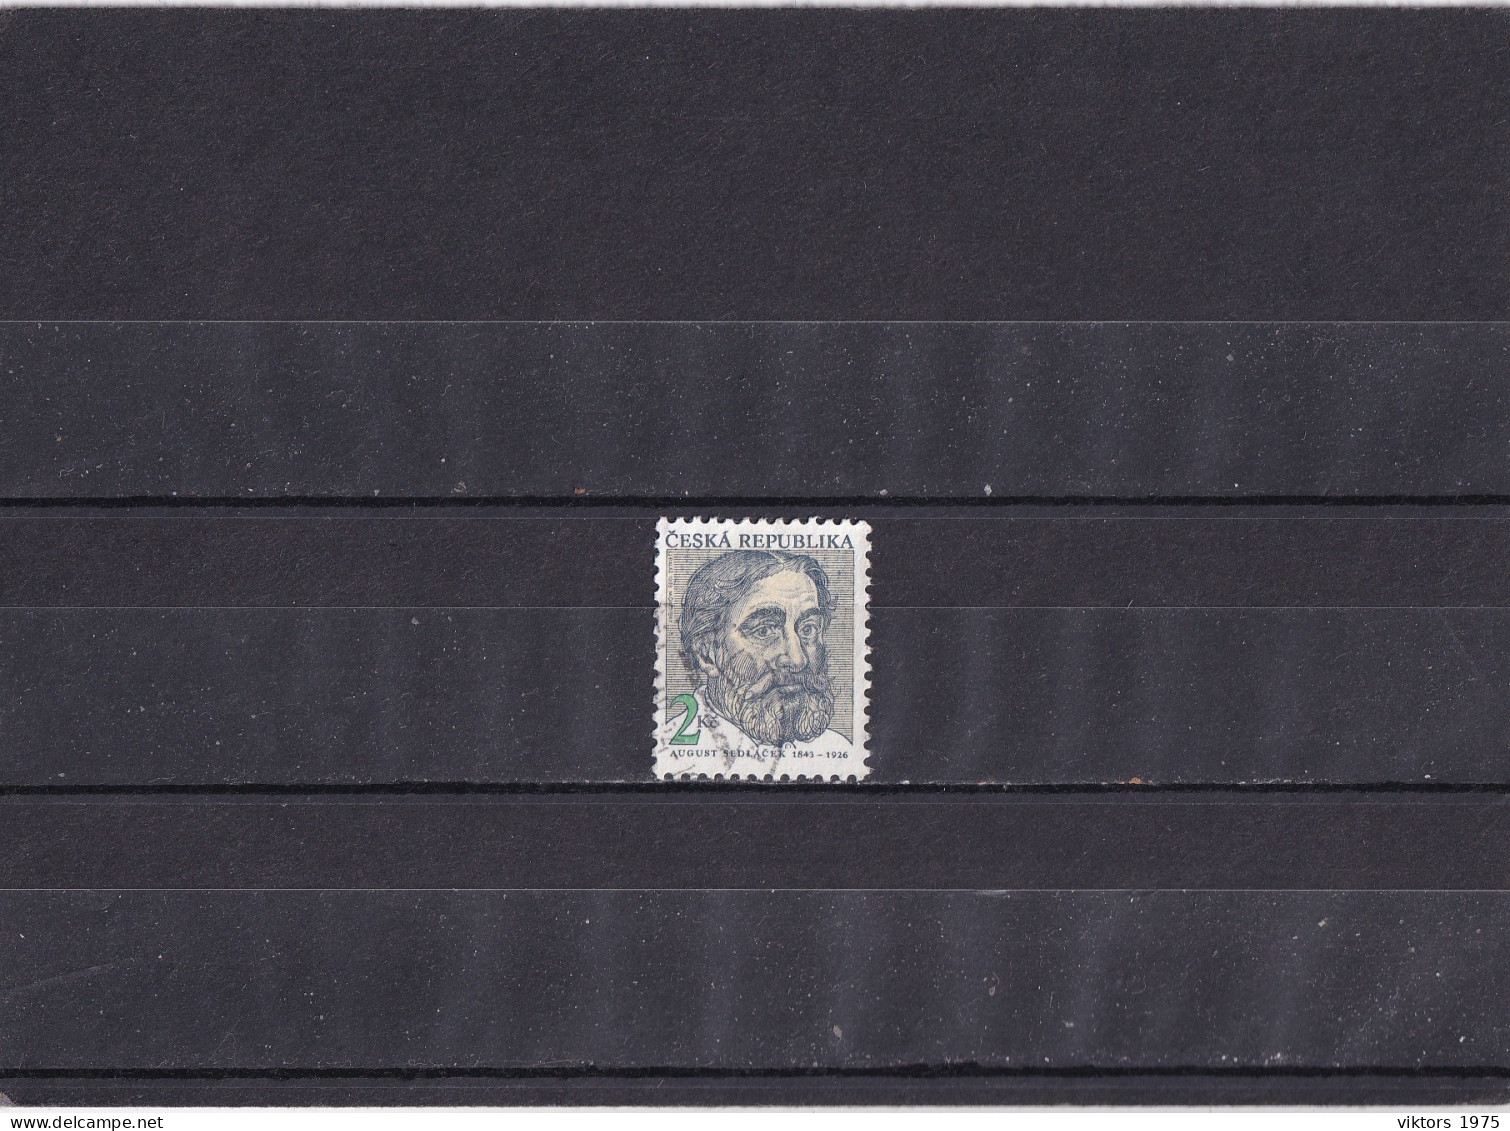 Used Stamp Nr.21 In MICHEL Catalog - Used Stamps